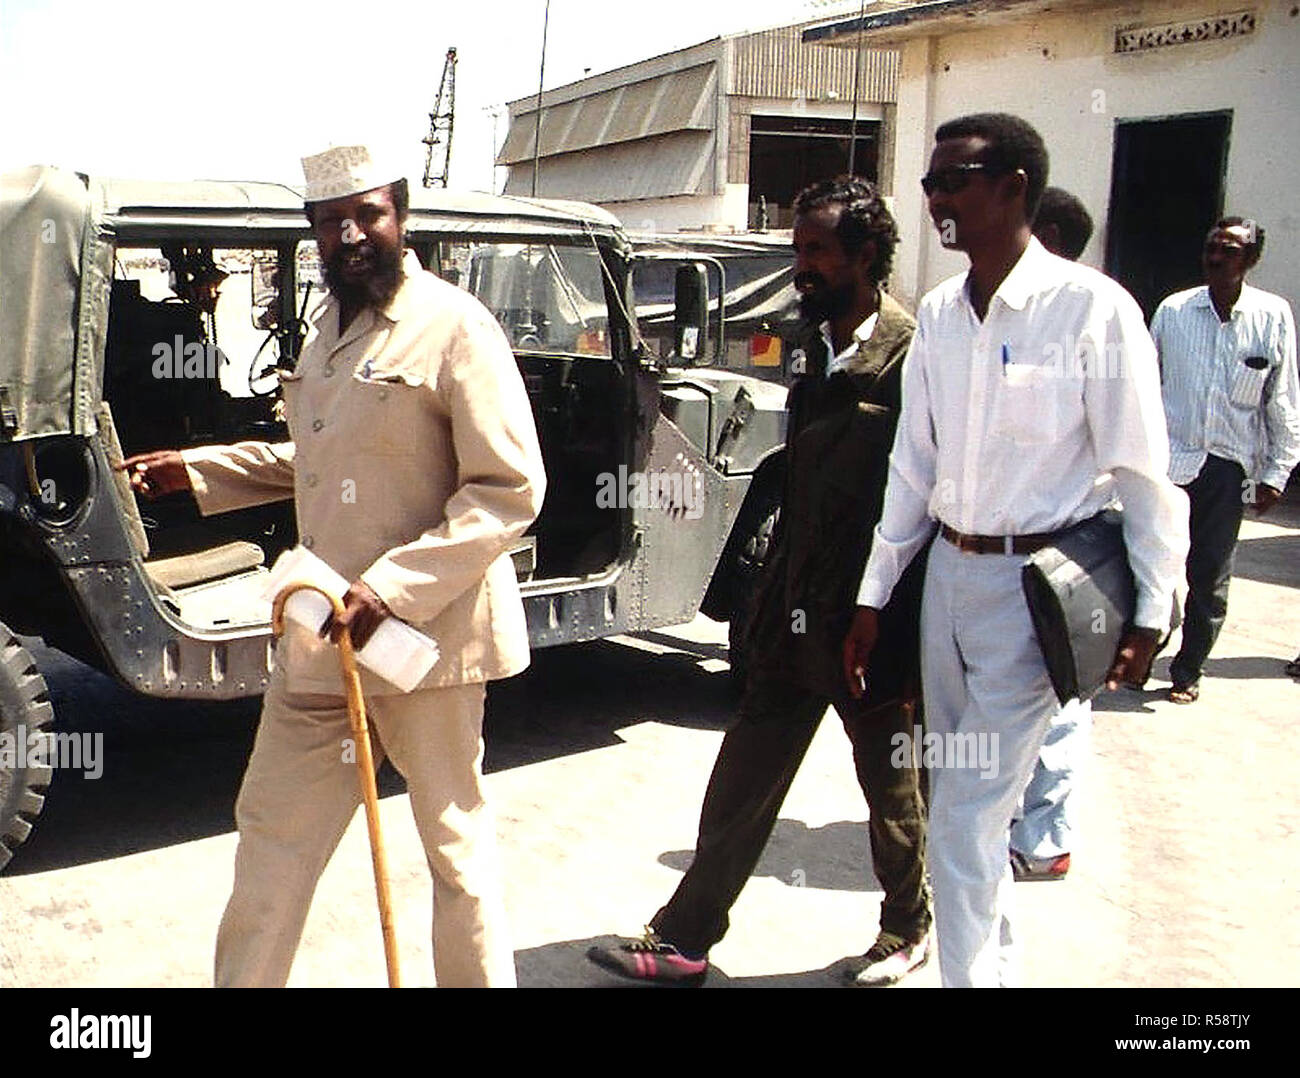 1992-straight-on-shot-of-somali-faction-leader-col-jess-at-left-with-hat-and-cane-walking-outside-the-joint-task-force-headquarters-in-kismayo-somalia-with-his-entourage-he-had-just-completed-a-meeting-with-bgen-lawson-magruder-usa-joint-task-force-commander-in-kismayo-bgen-magruder-not-shown-is-from-the-10th-mountain-division-fort-drum-new-york-this-mission-is-in-direct-support-of-operation-restore-hope-R58TJY.jpg